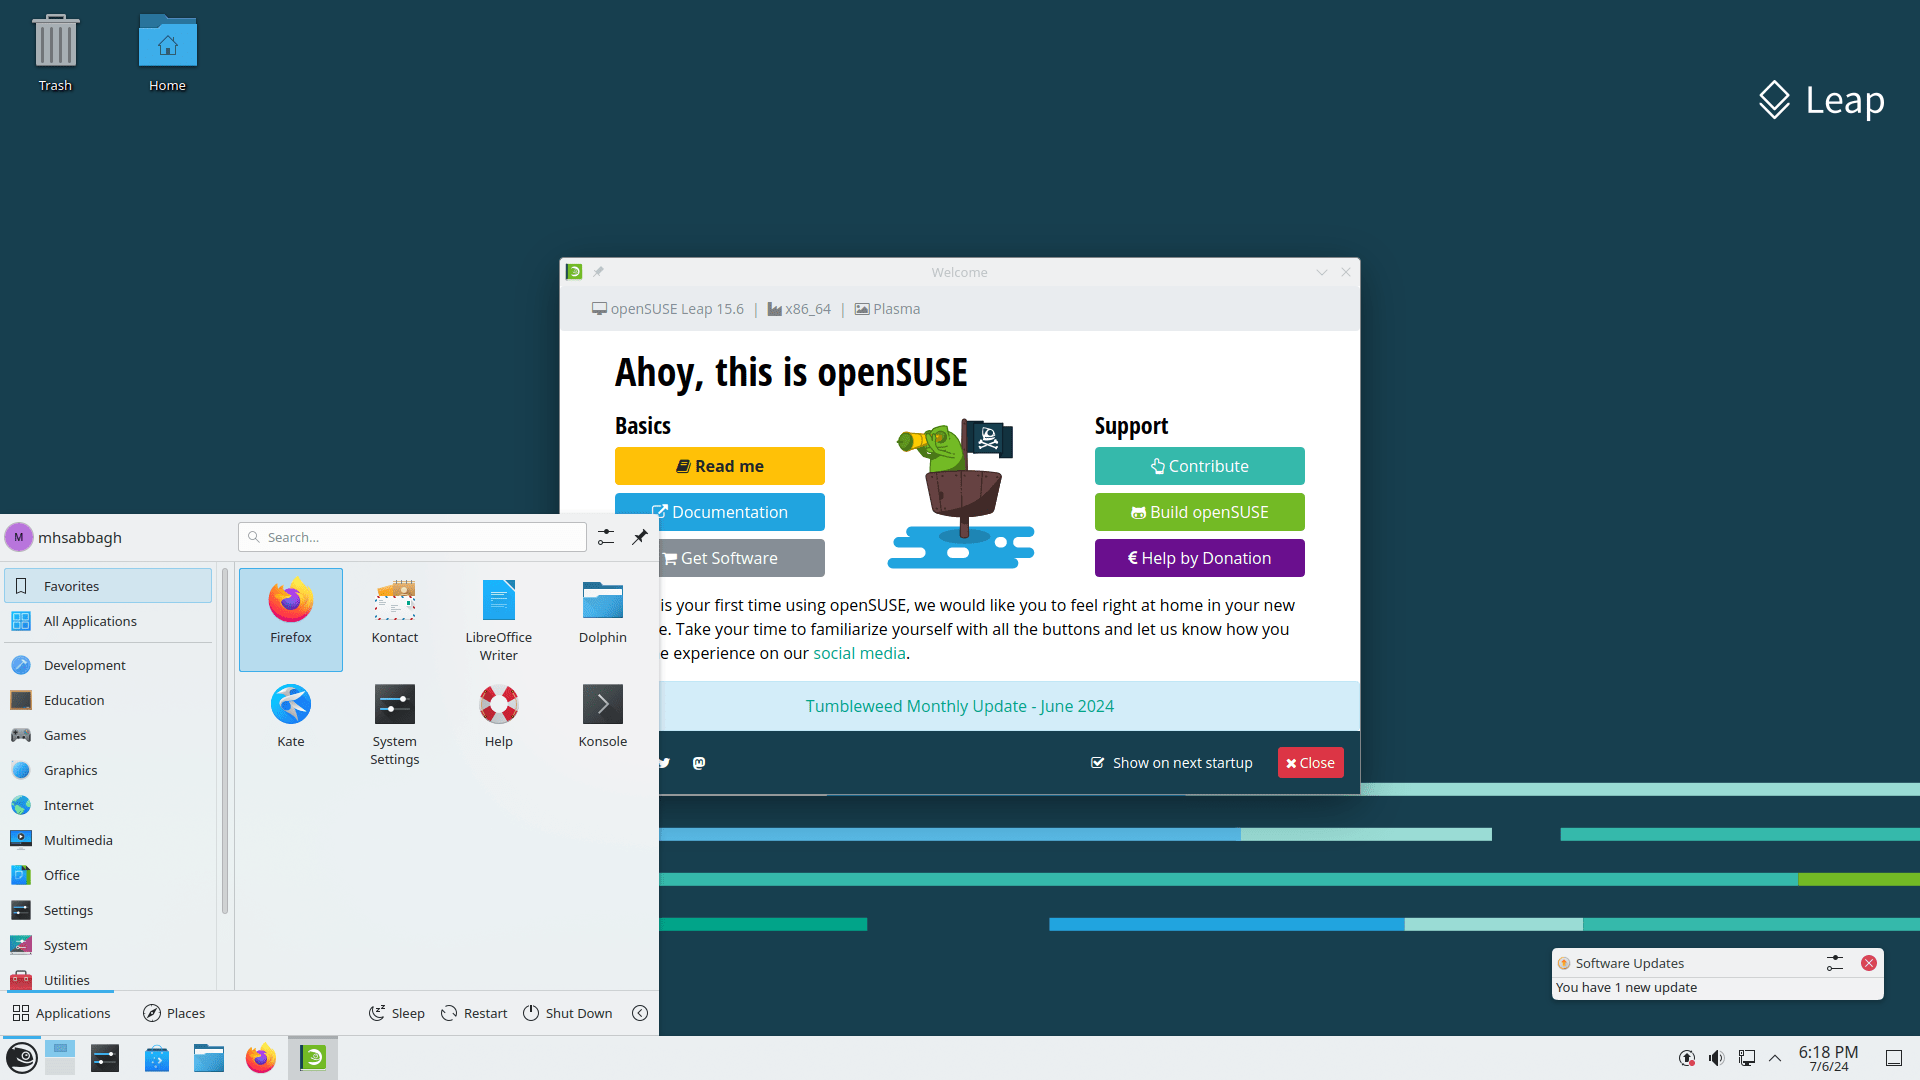 What’s Come of openSUSE As of Its Leap 15.6 Release?